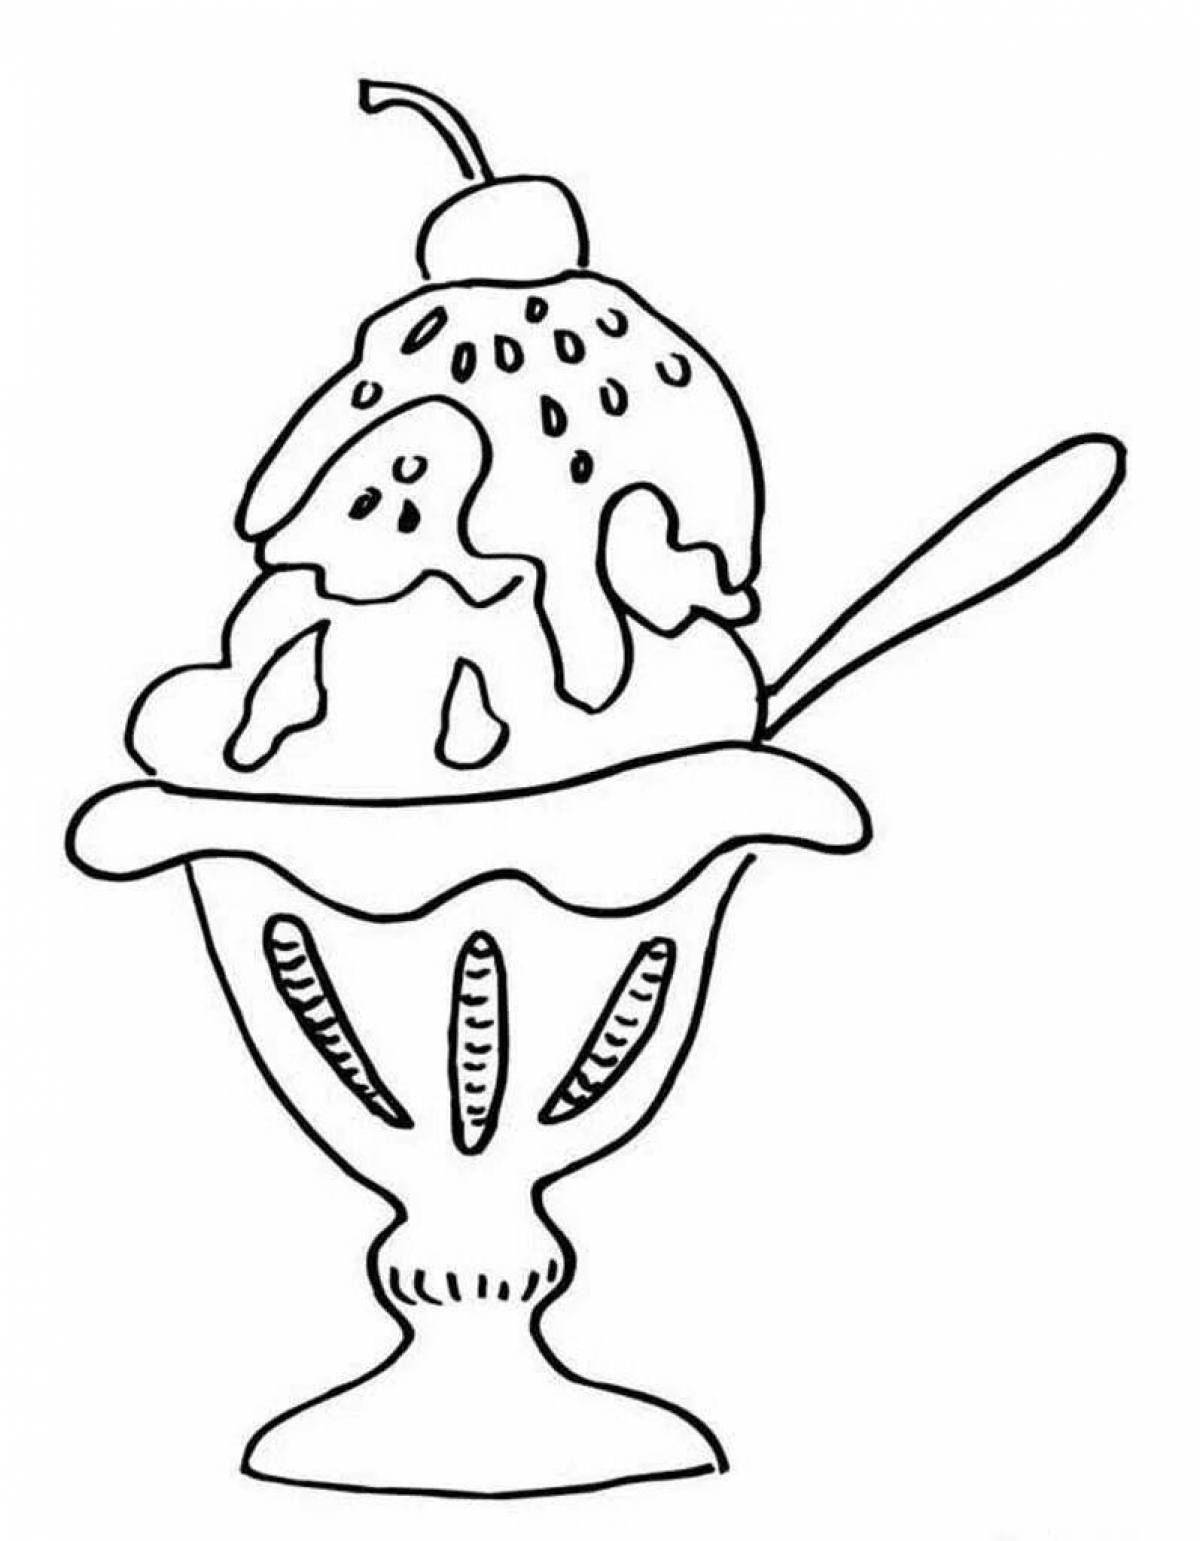 Coloring book magical ice cream for preschoolers